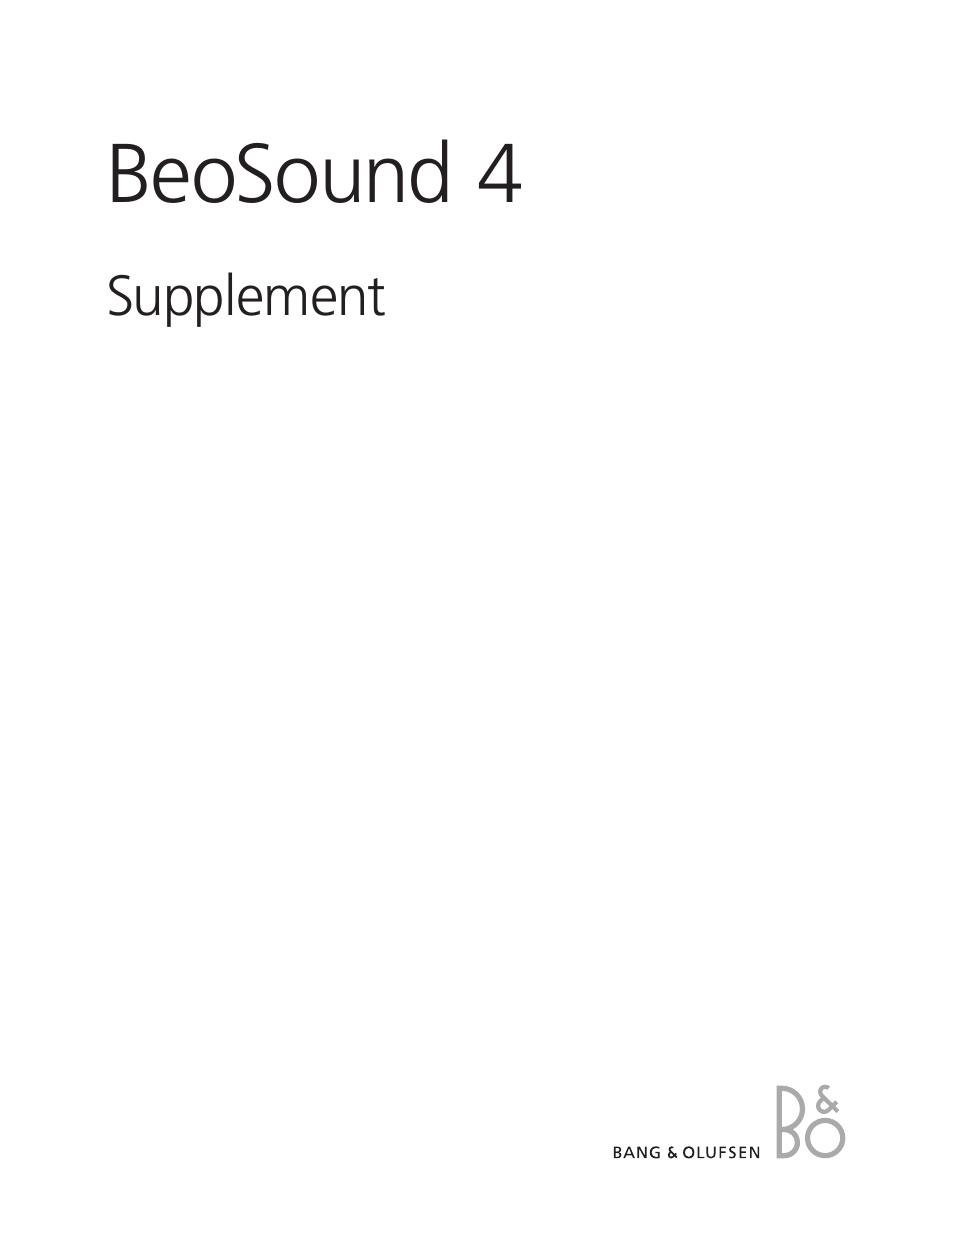 BeoSound 4 - Supplement to User Guide